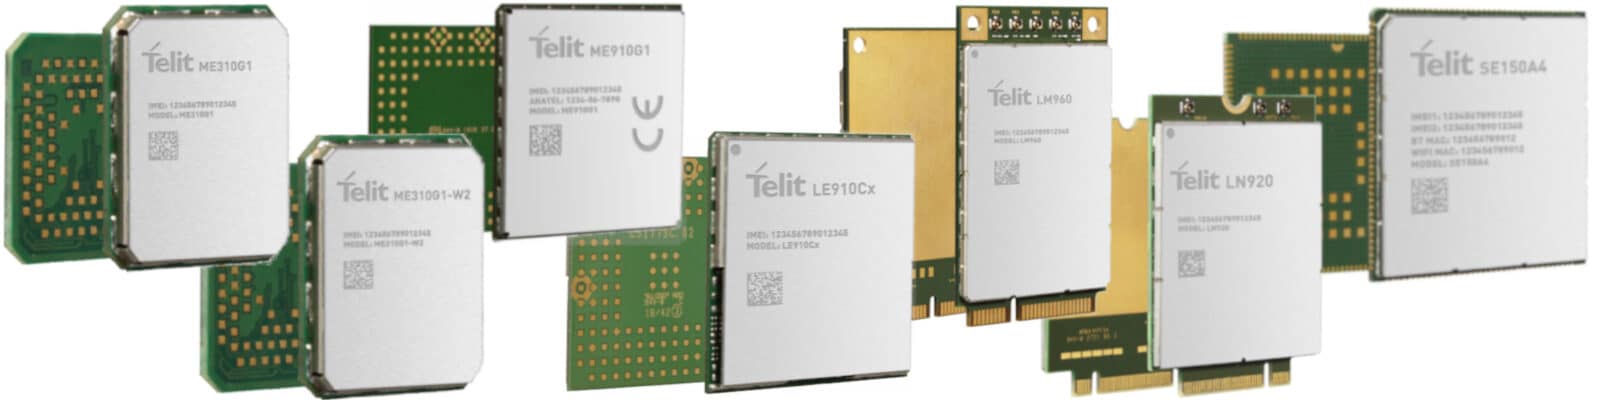 Our portfolio of embedded LTE modules and data cards designed for use on the first responder network.